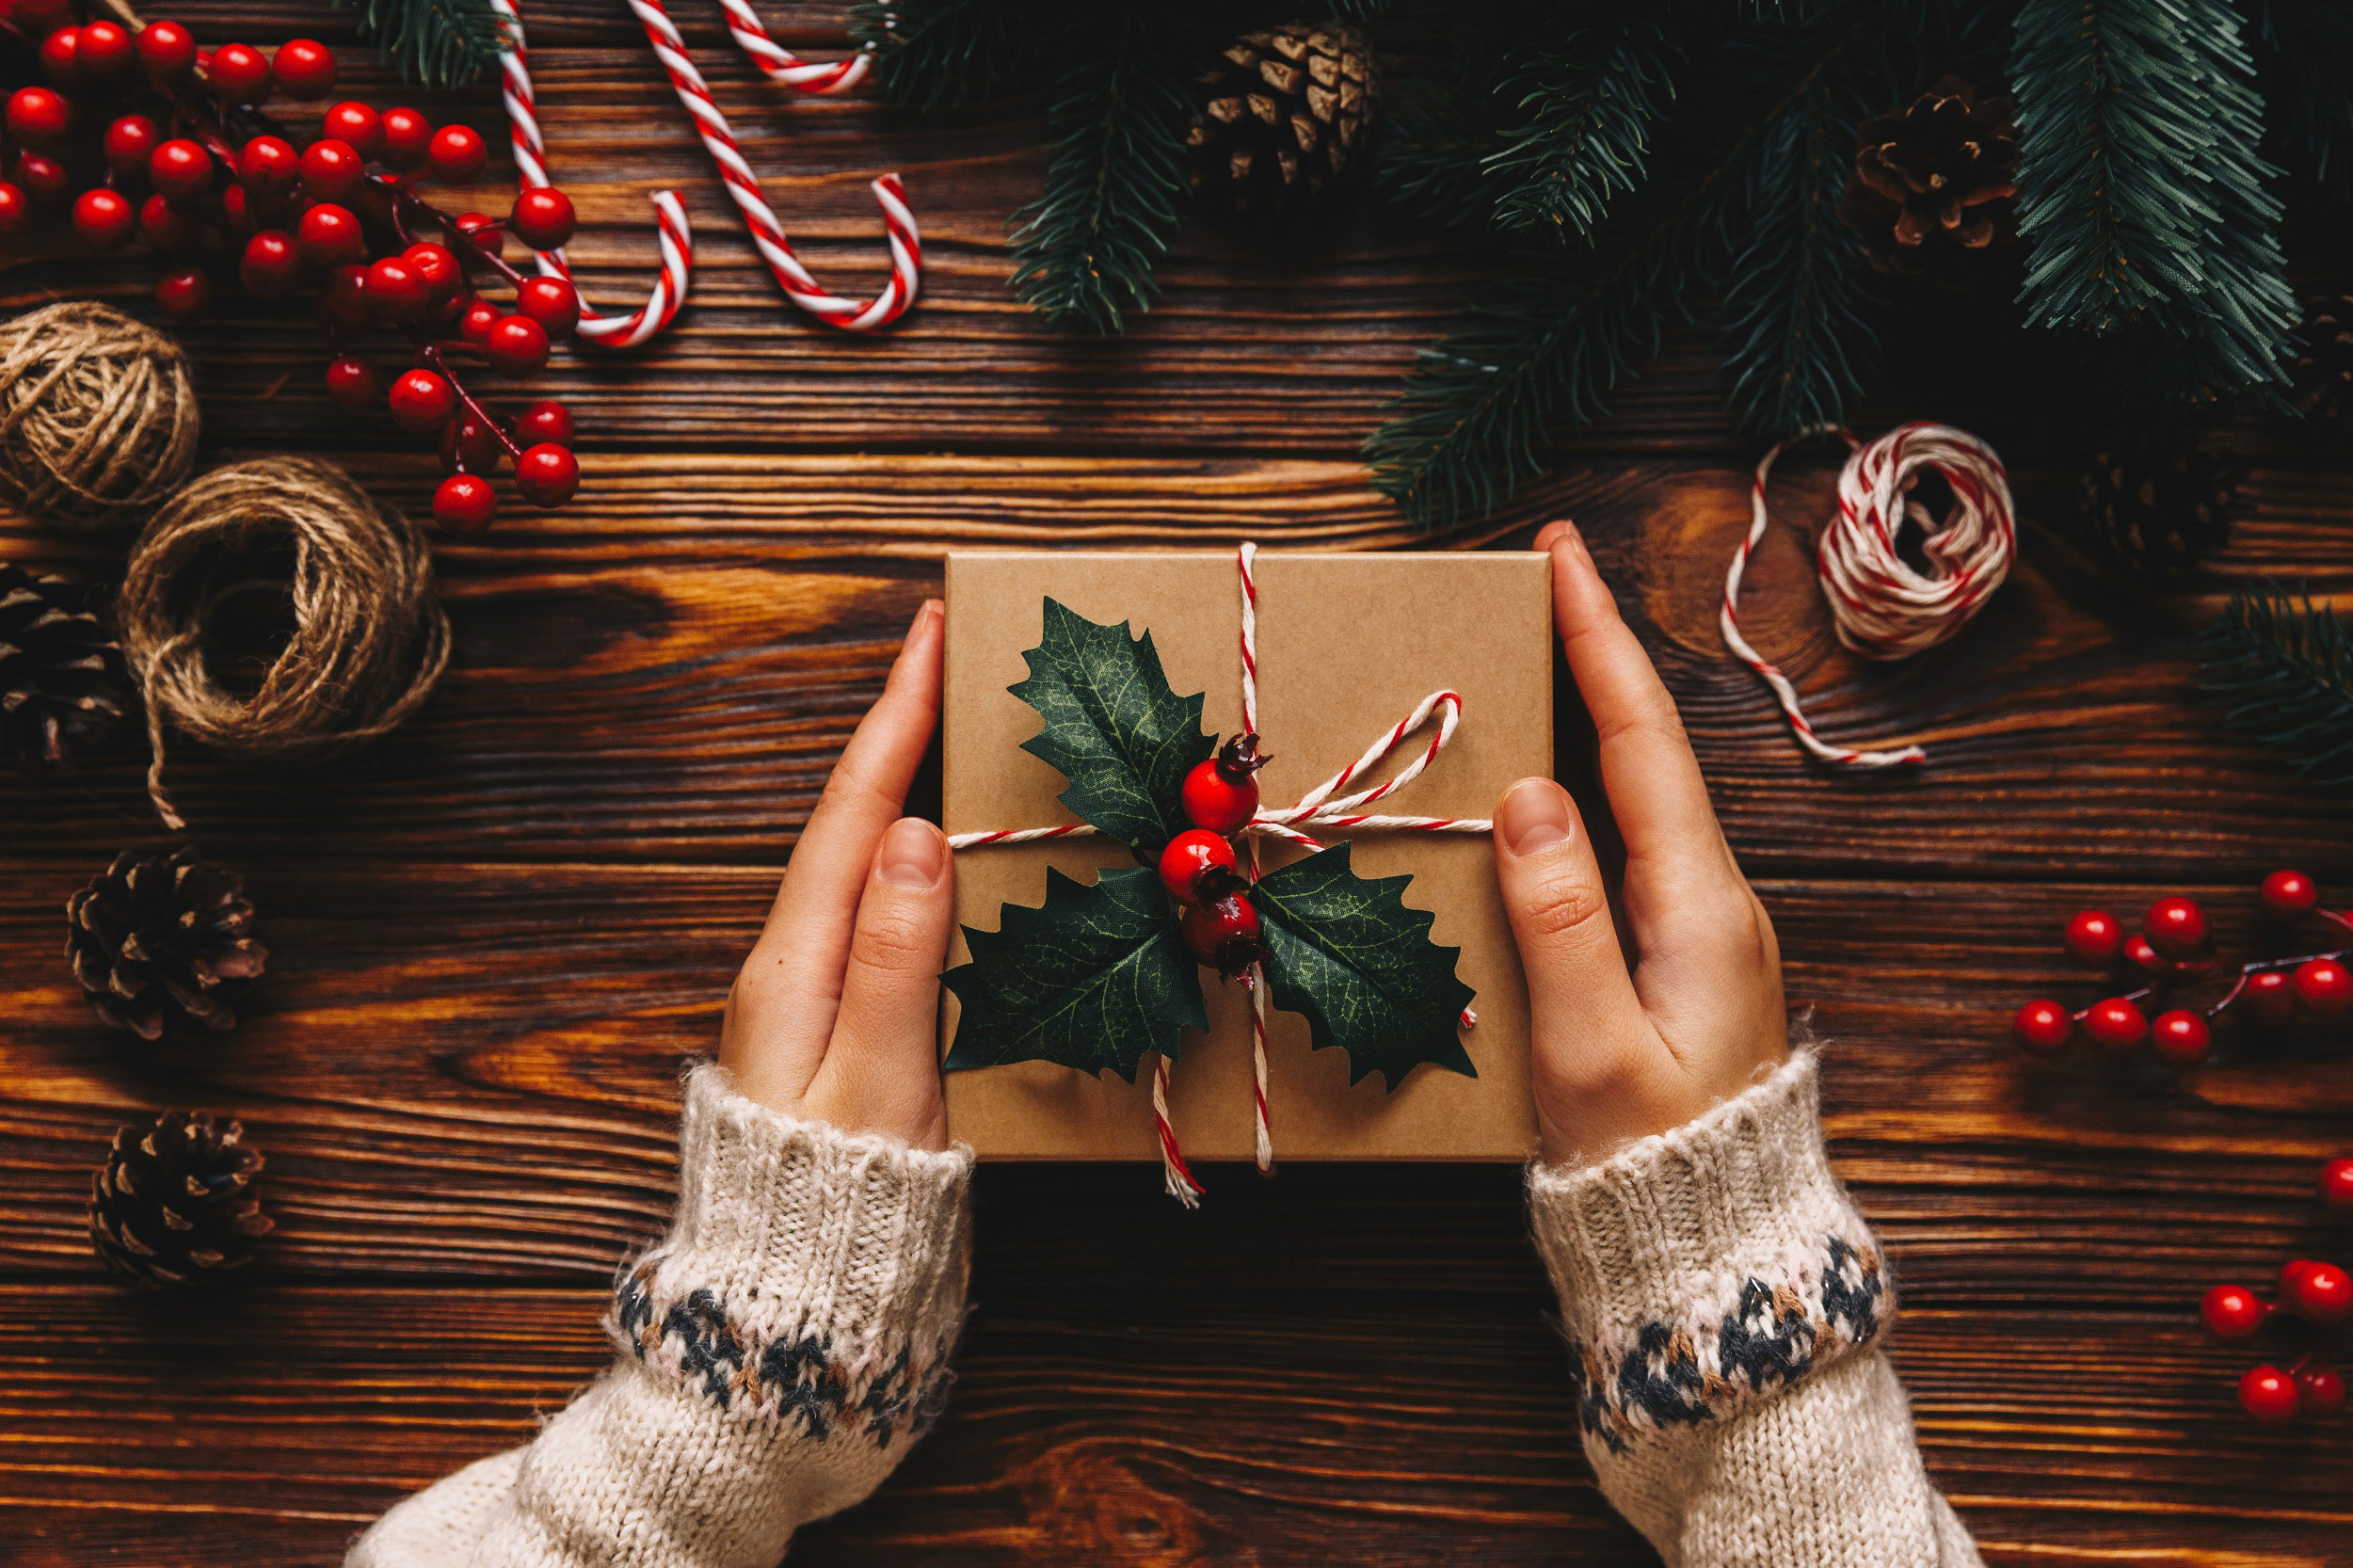 Adobe Stock image by Pink Coffee studio depicts a person holding a holiday package wrapped with holly. Other decorations are neatly stacked around the package, including pine branches, cones, twine, berries and sugar canes